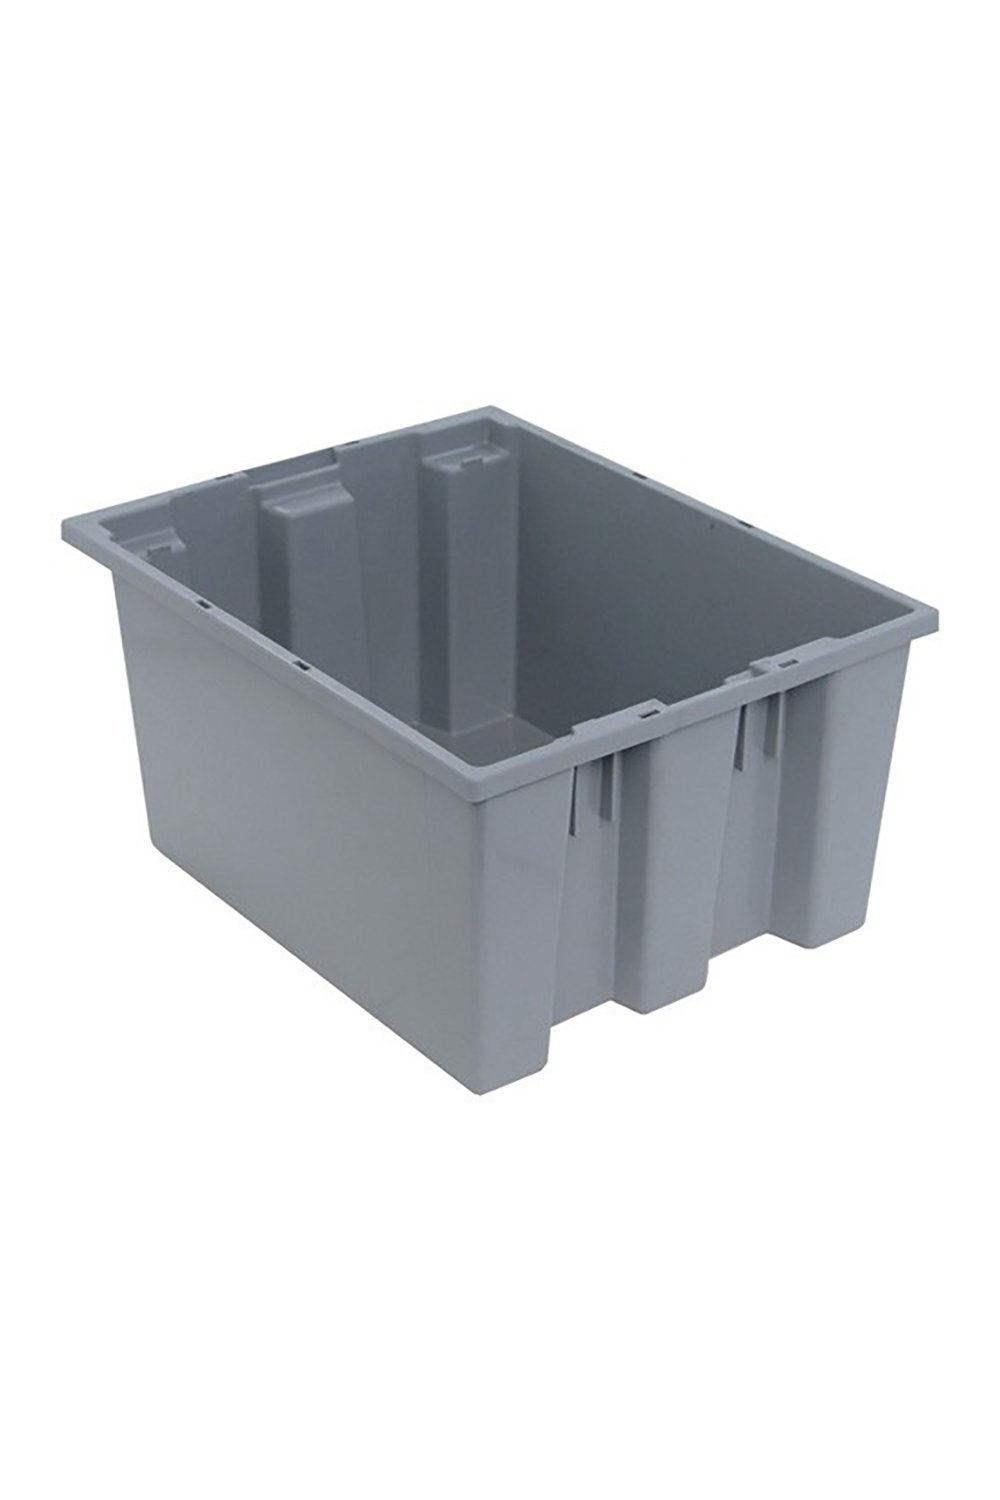 Stack and Nest Tote Bins & Containers Acart 19-1/2"L x 15-1/2"W x 10"H Gray 